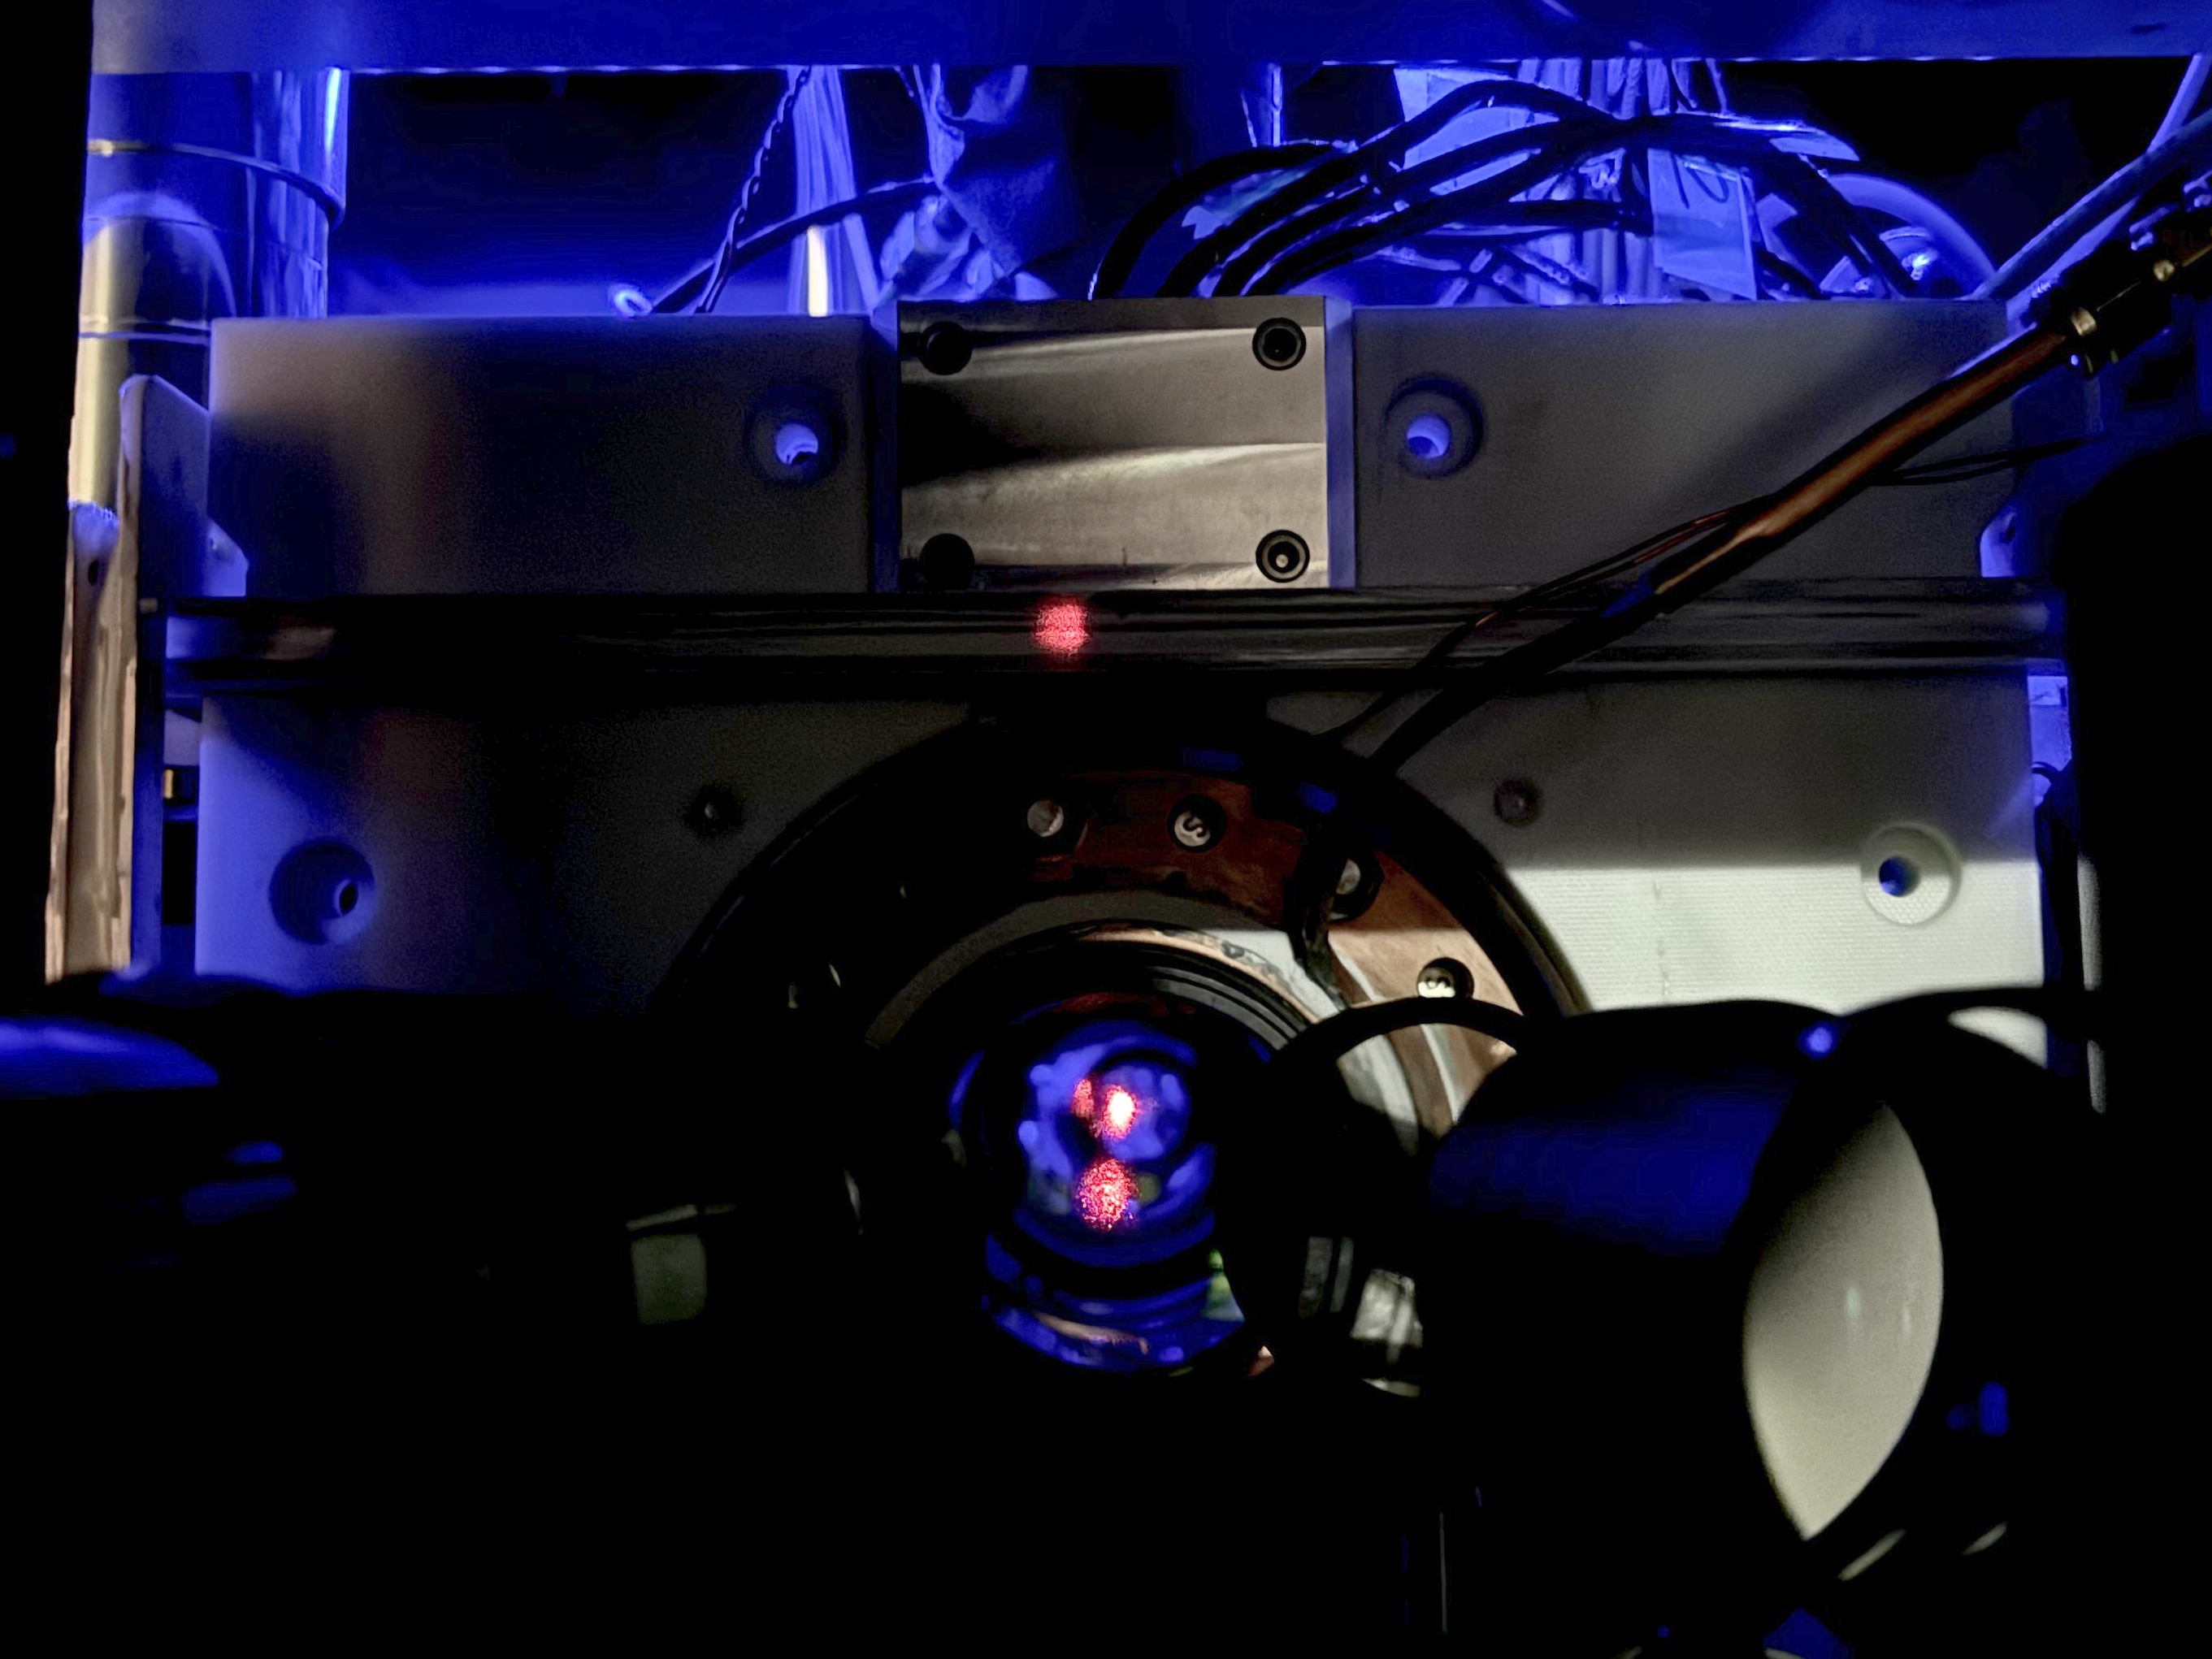 World’s Most Accurate and Precise Atomic Clock Pushes New Frontiers in Physics